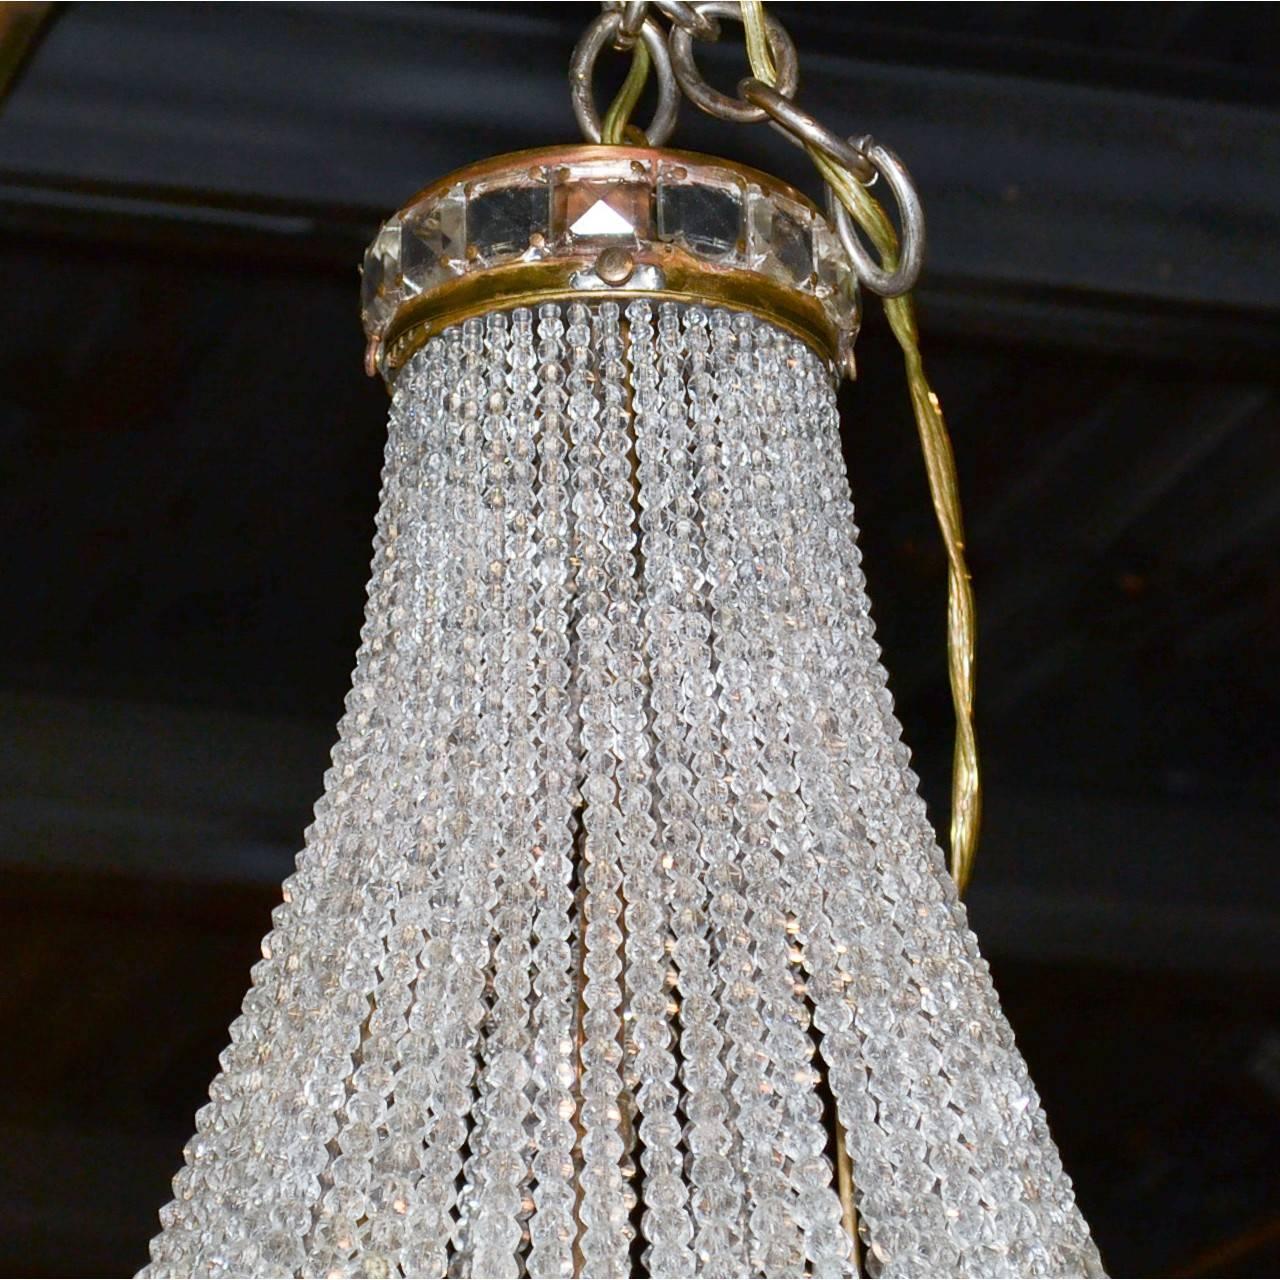 French bronze and crystal basket chandelier, circa 1910.
Made in France.
Measures: 27 inches height x 14 inches wide.